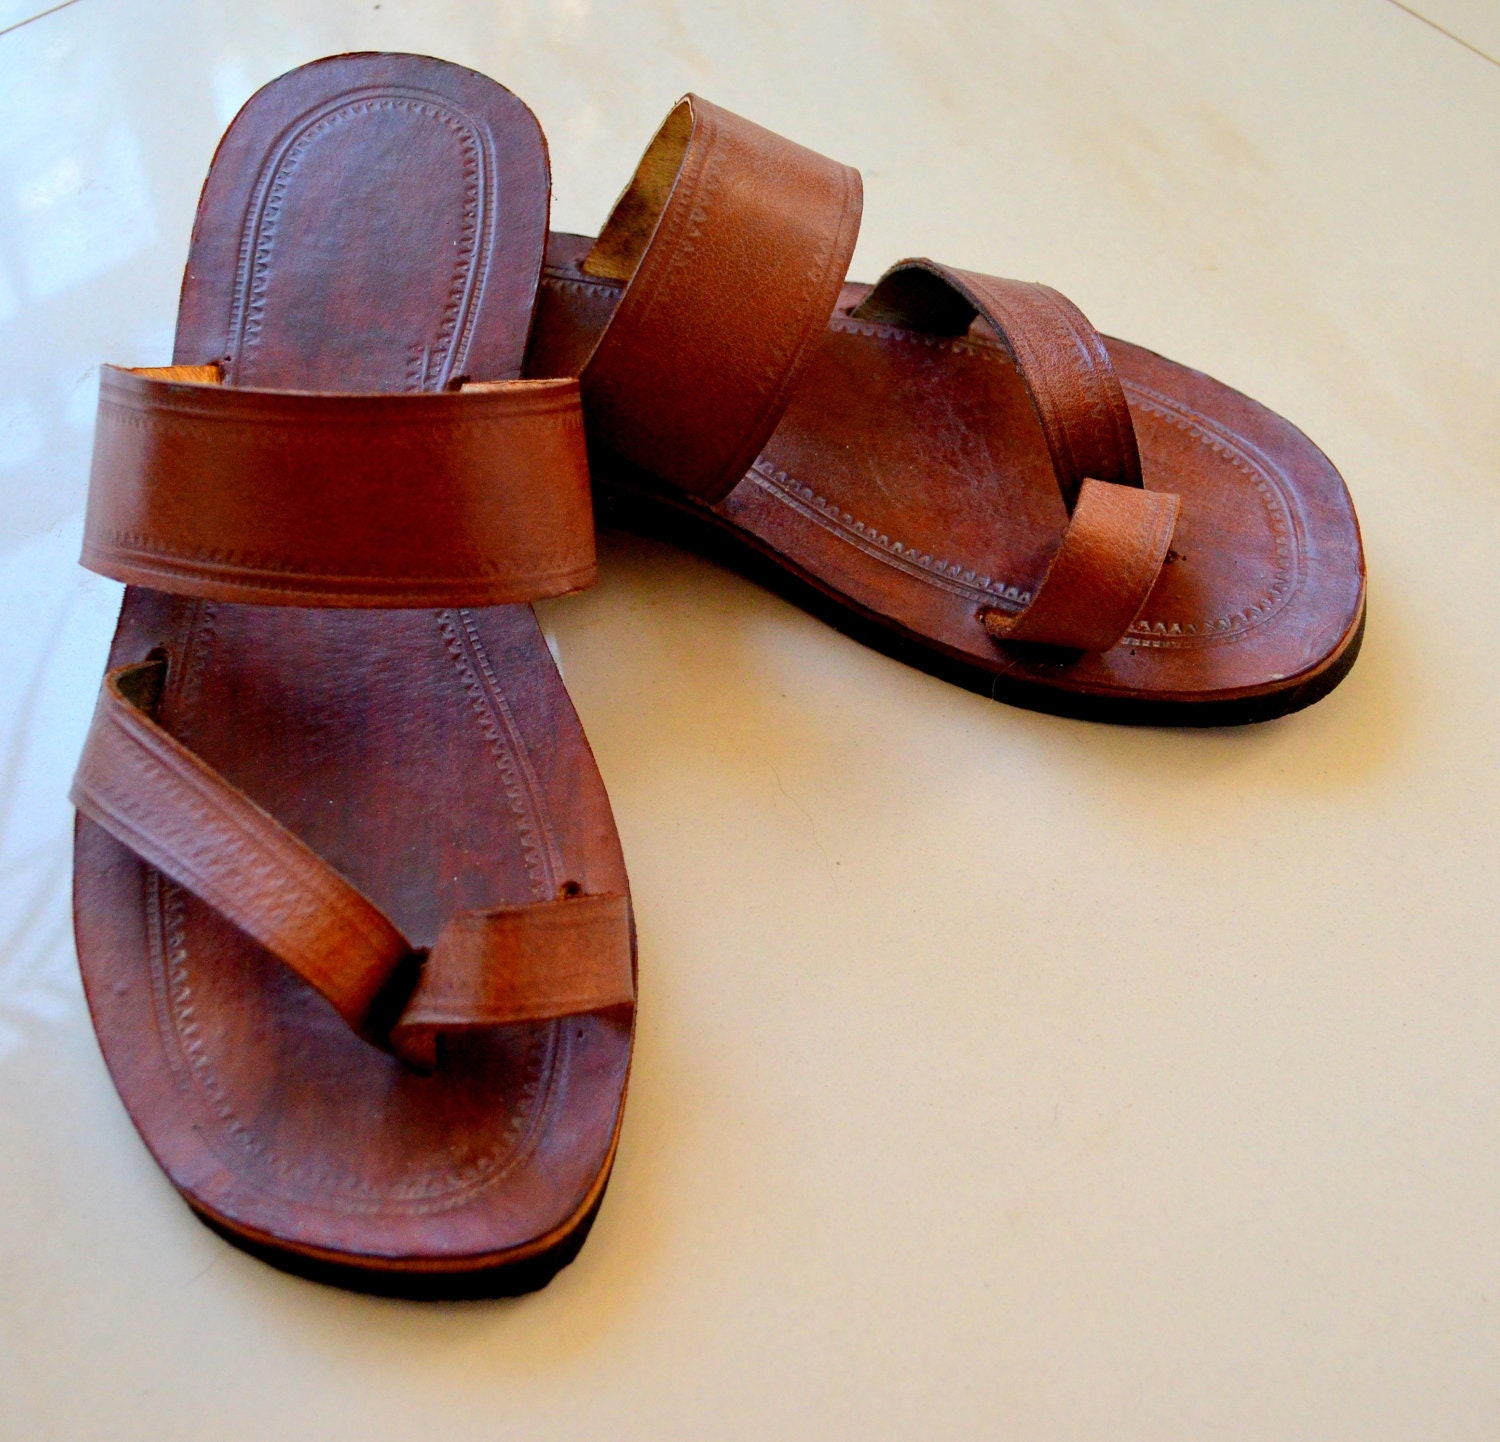 Single Band Leather Sandals - Handmade, Indian Leather Sandals, Custom ...